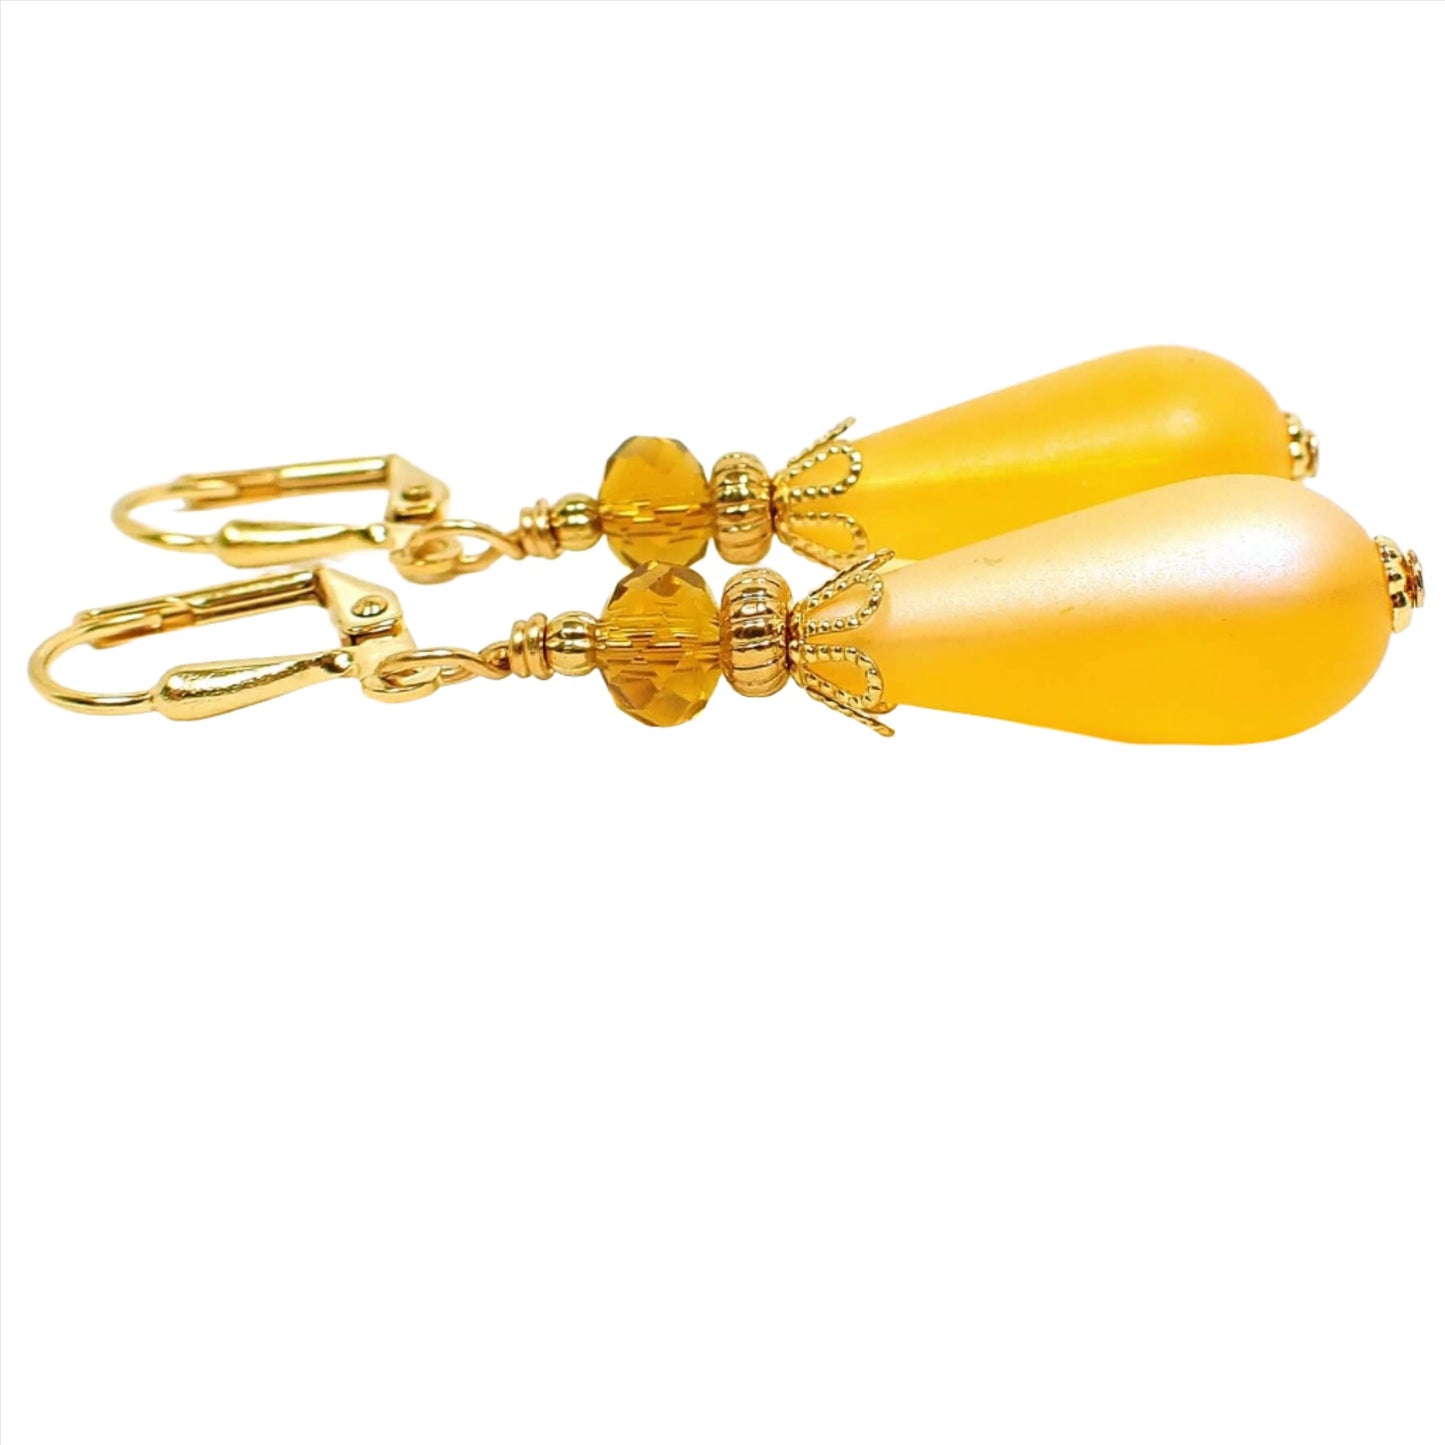 Side view of the handmade teardrop earrings. The metal is gold plated in color. The top beads are small faceted glass dark orange beads and the bottom beads are a frosted rich yellow lucite teardrop bead. 